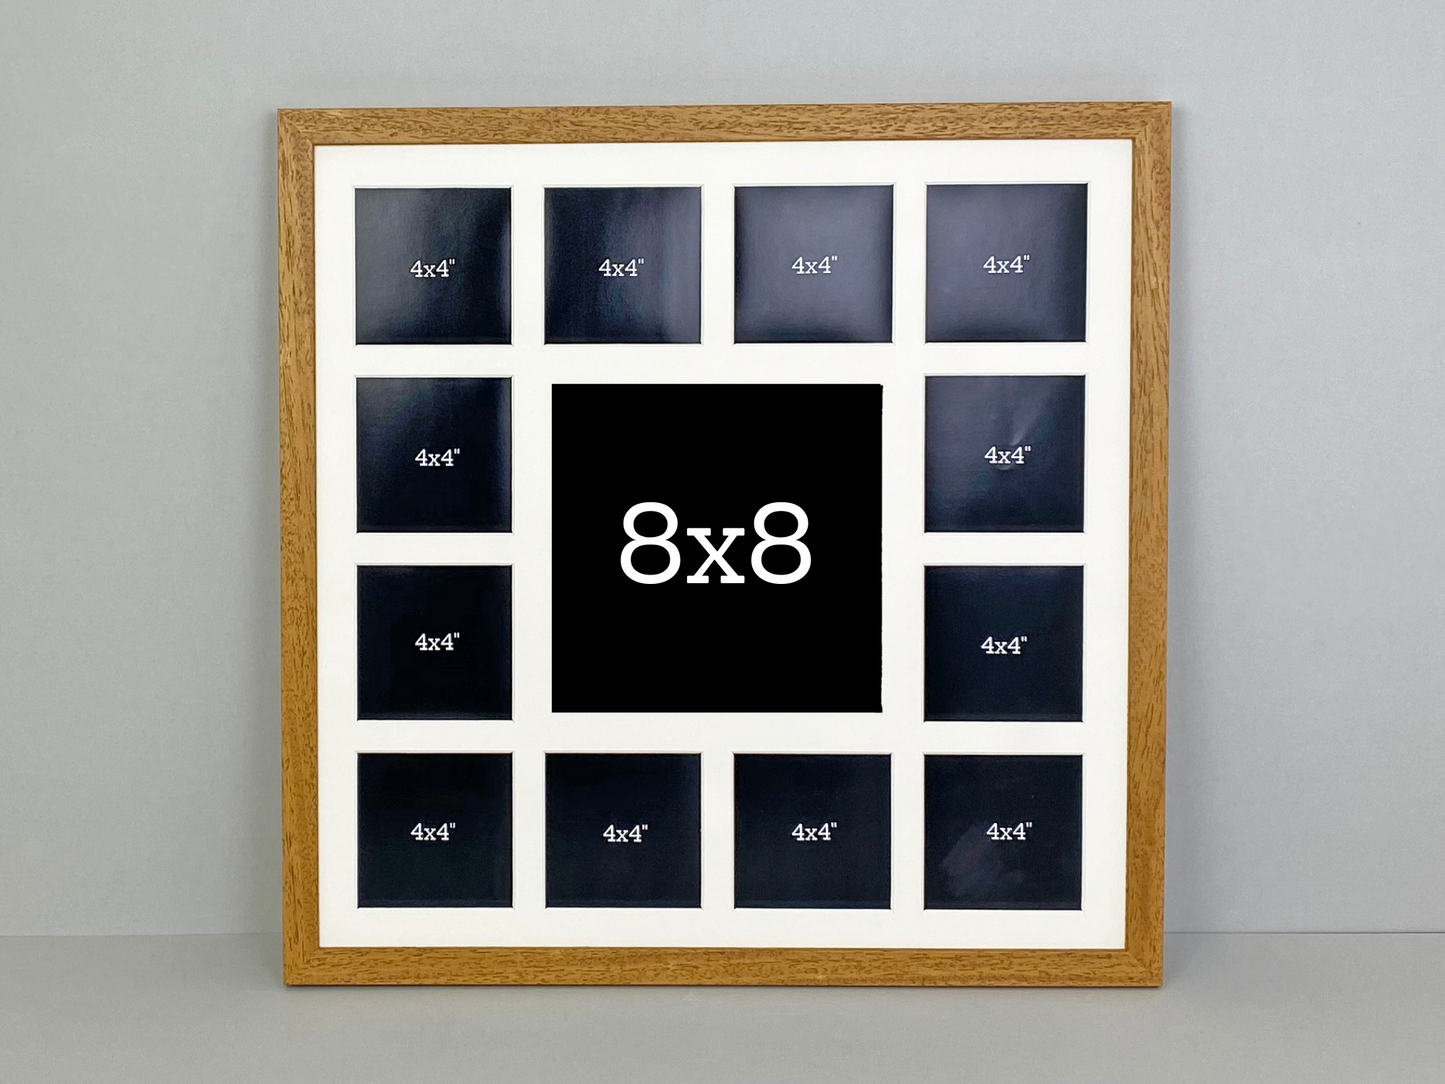 Suits One 8x8" Photo and Twelve 4x4" photos. 50x50cm. Wooden Multi Aperture Photo Frame.